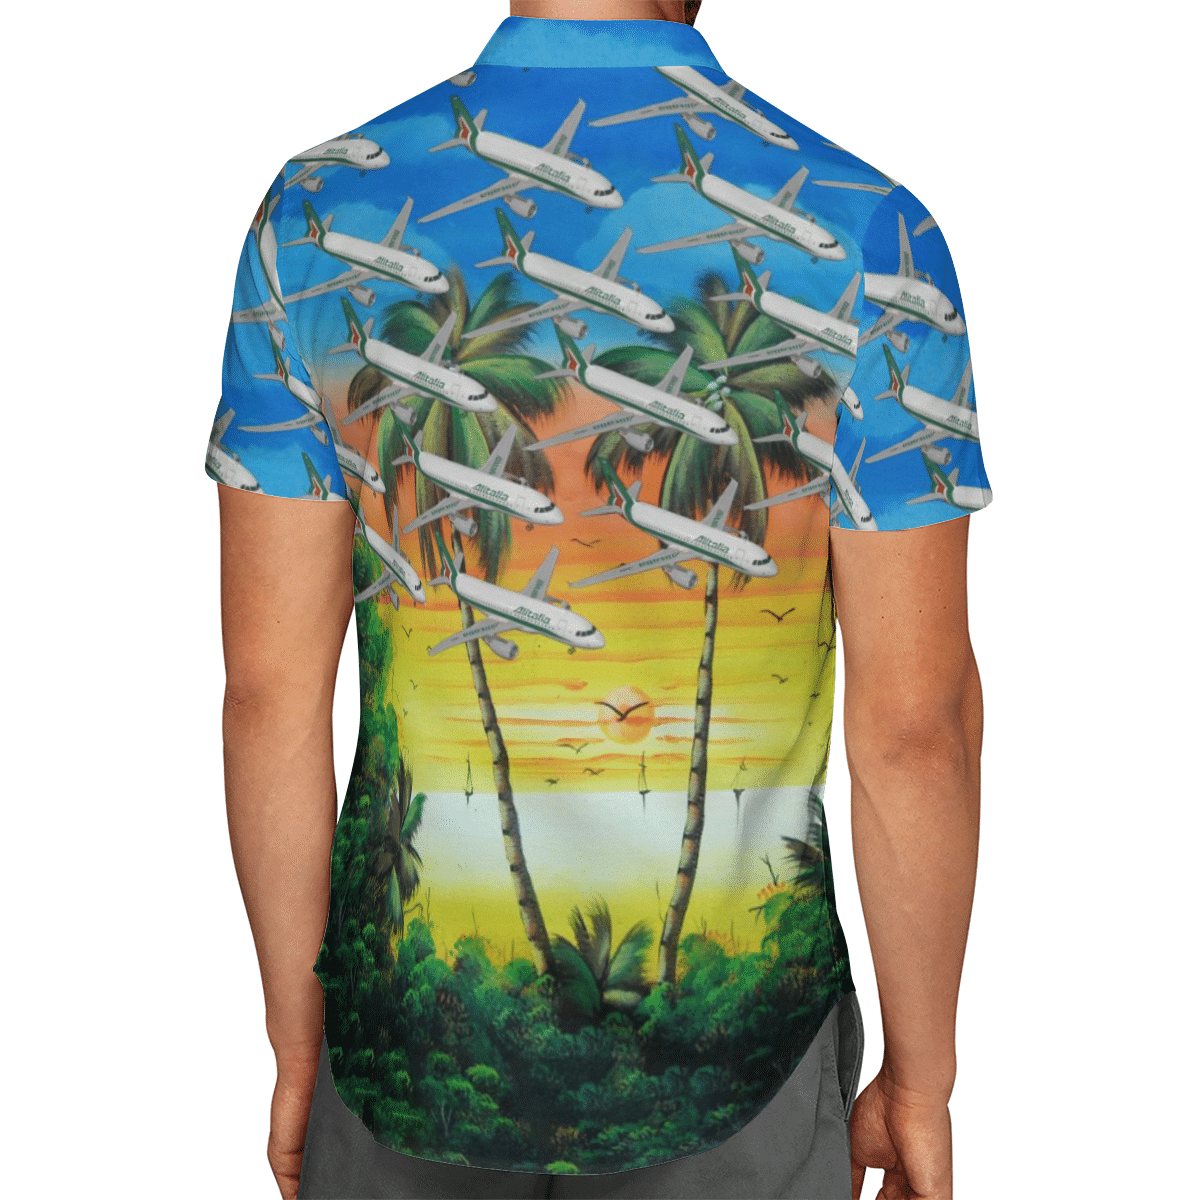 Going to the beach with a quality shirt 40